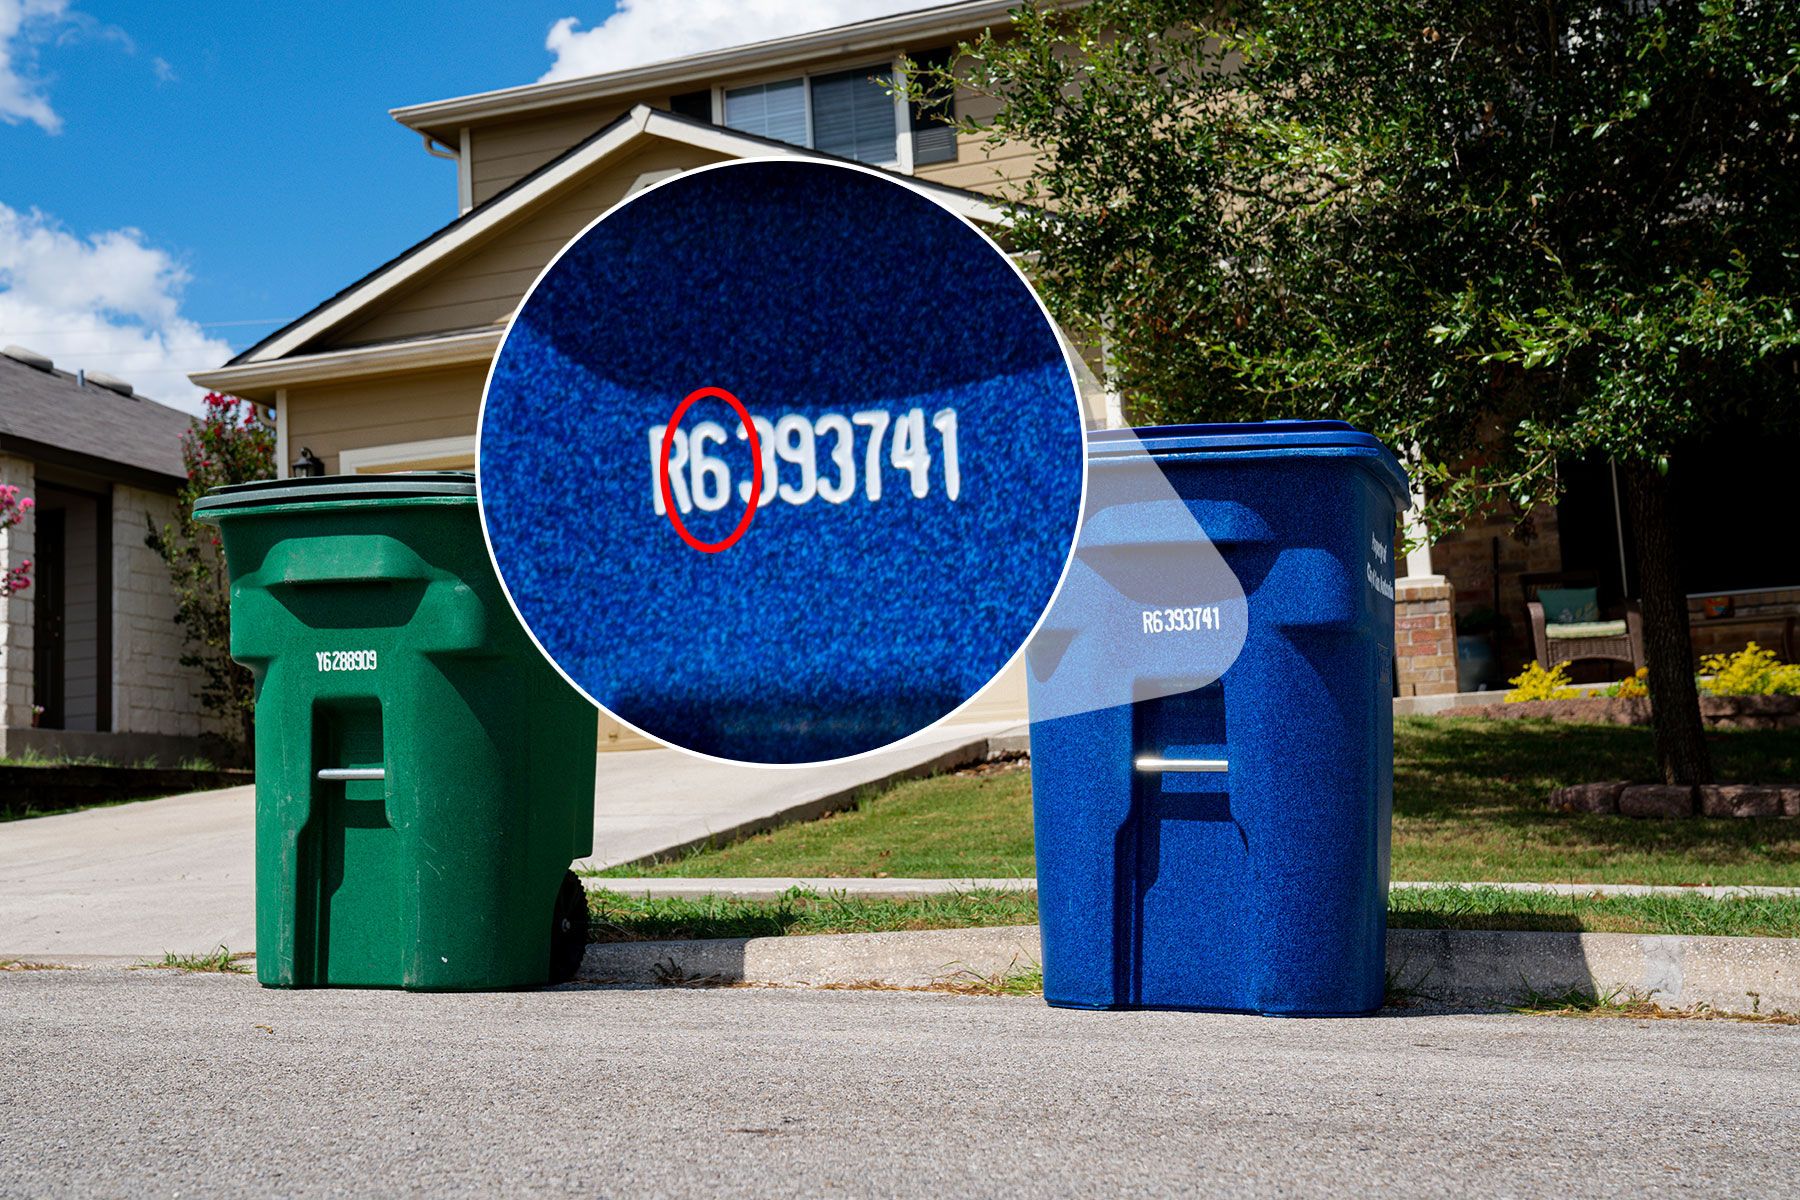 Curbside Recycling Collection - City of San Antonio